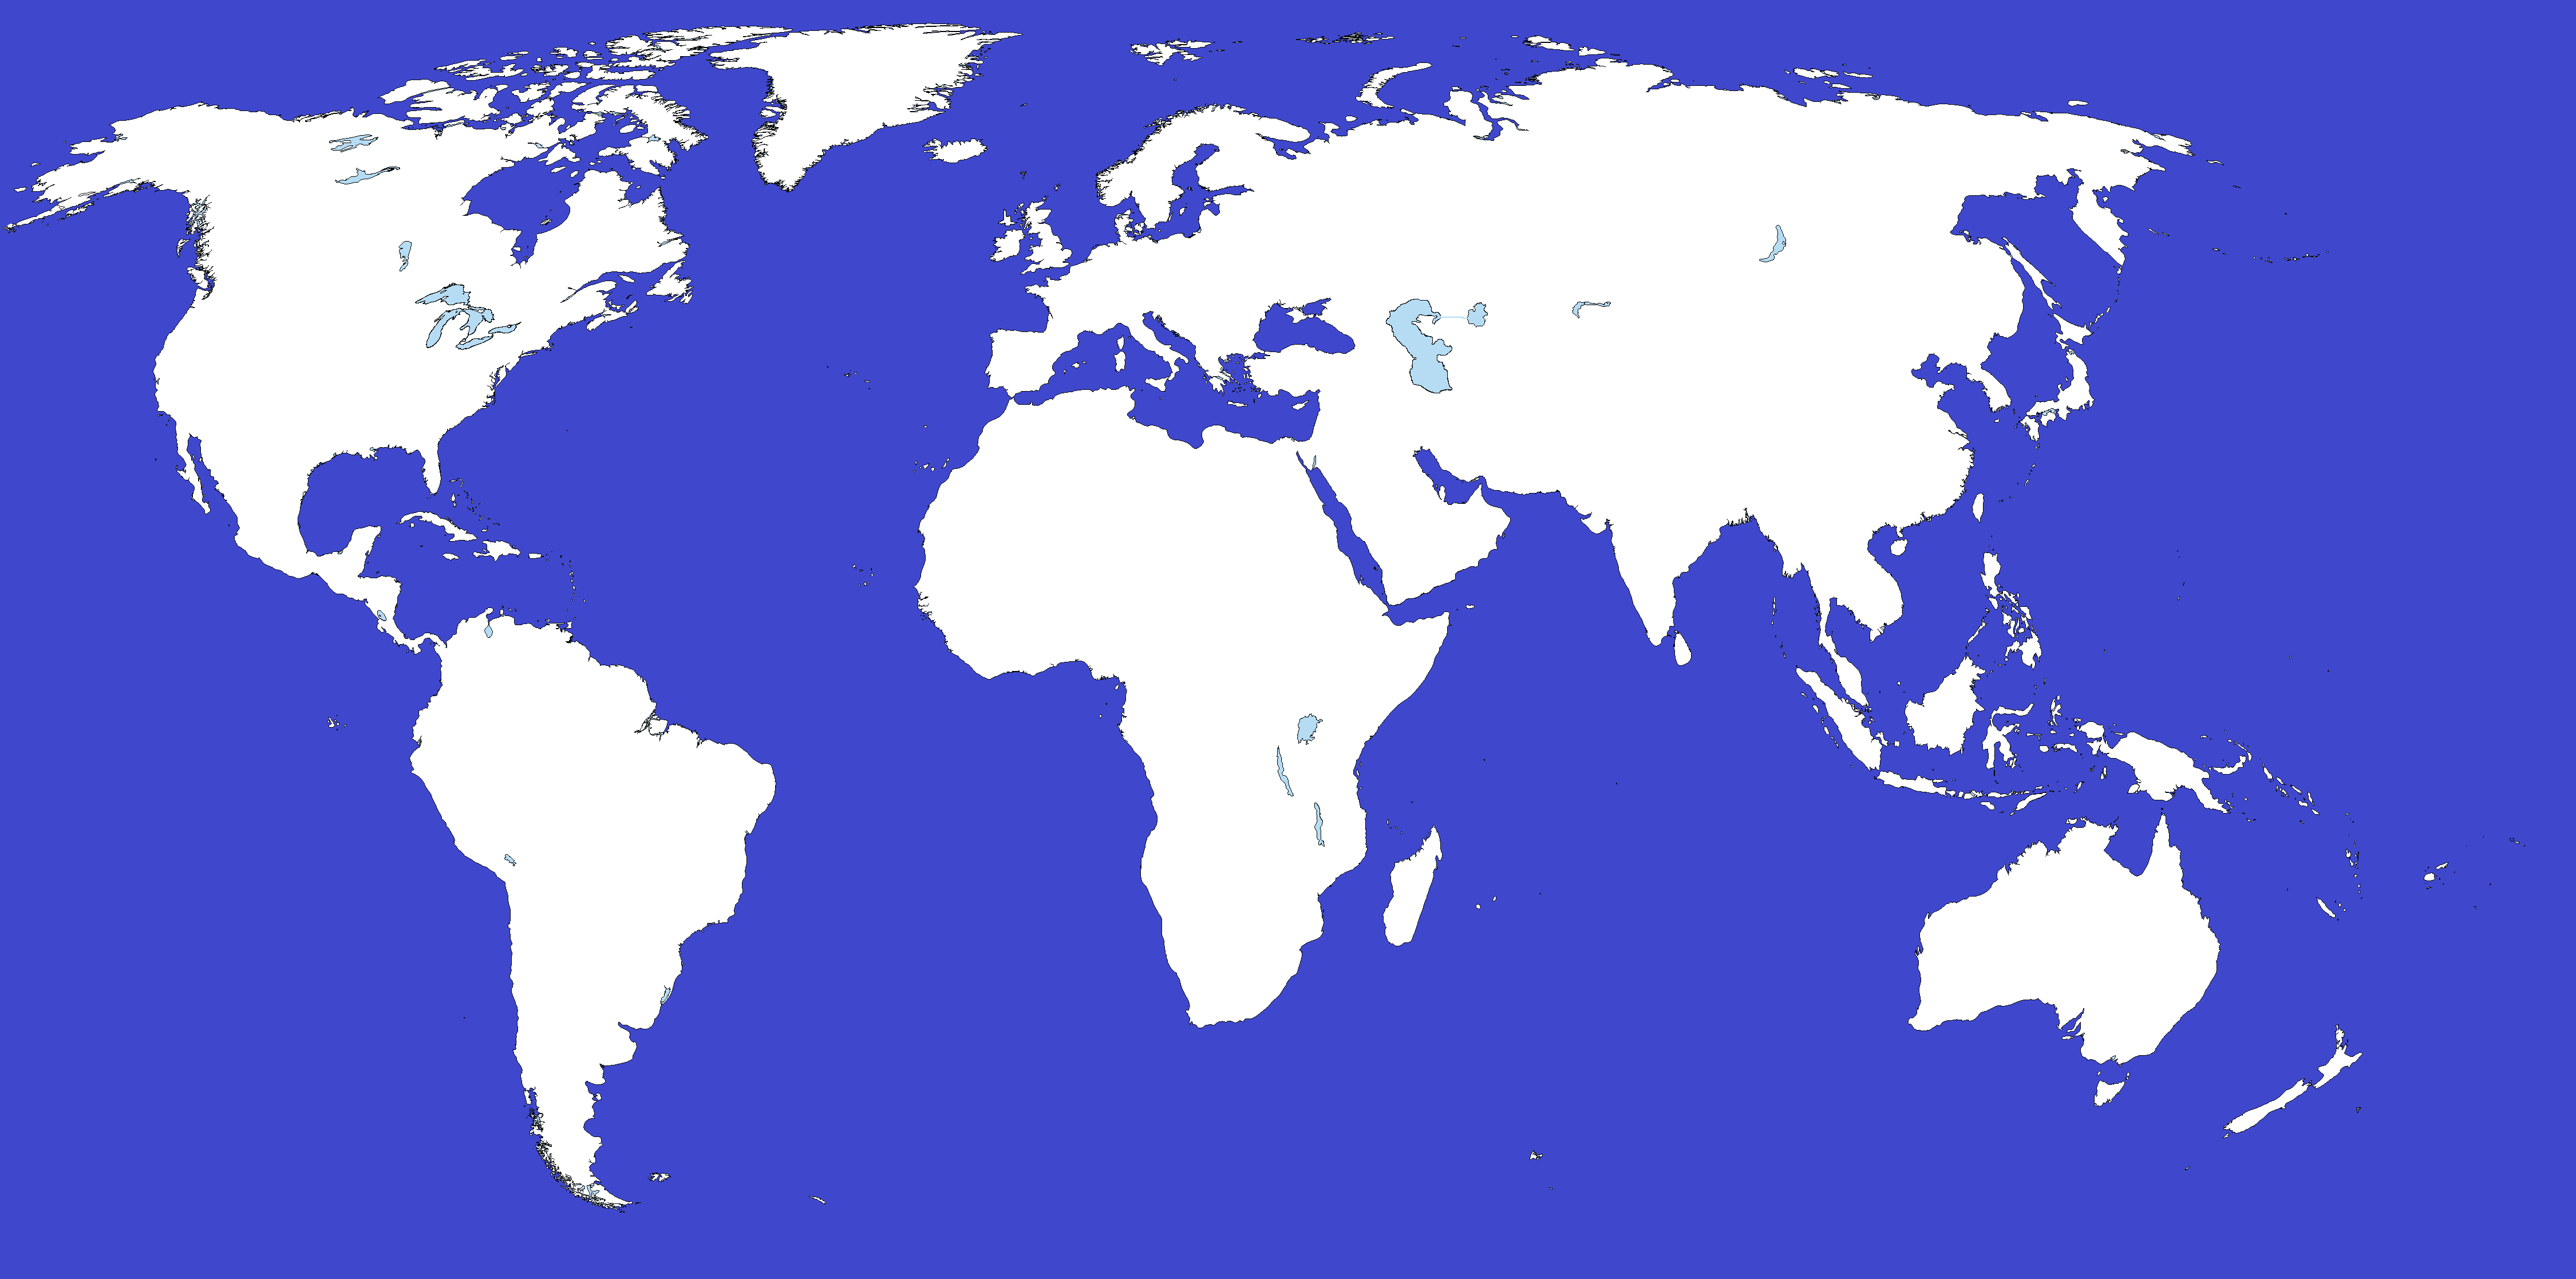 File:A large blank world map with oceans marked in blue.PNG - Wikipedia